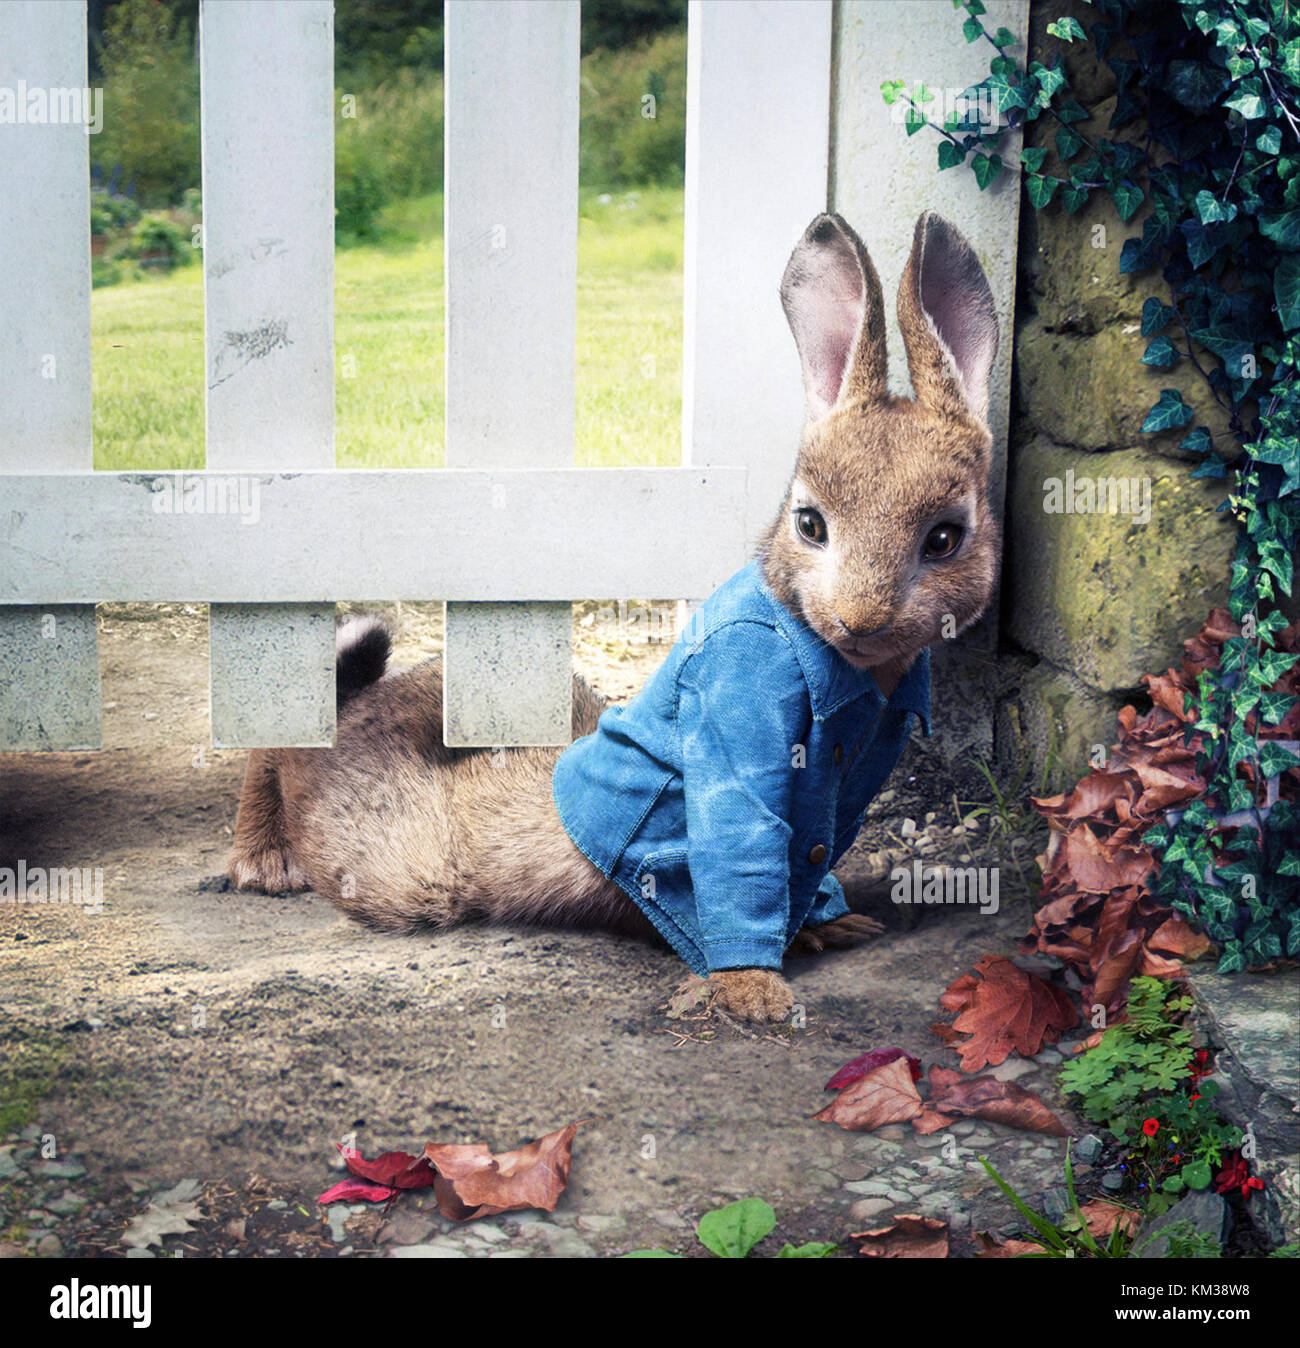 Peter Rabbit is an upcoming 2018 3D live-action/CGI animated adventure  comedy film directed by Will Gluck from a screenplay by Rob Lieber and  Gluck, based on the stories of the character of